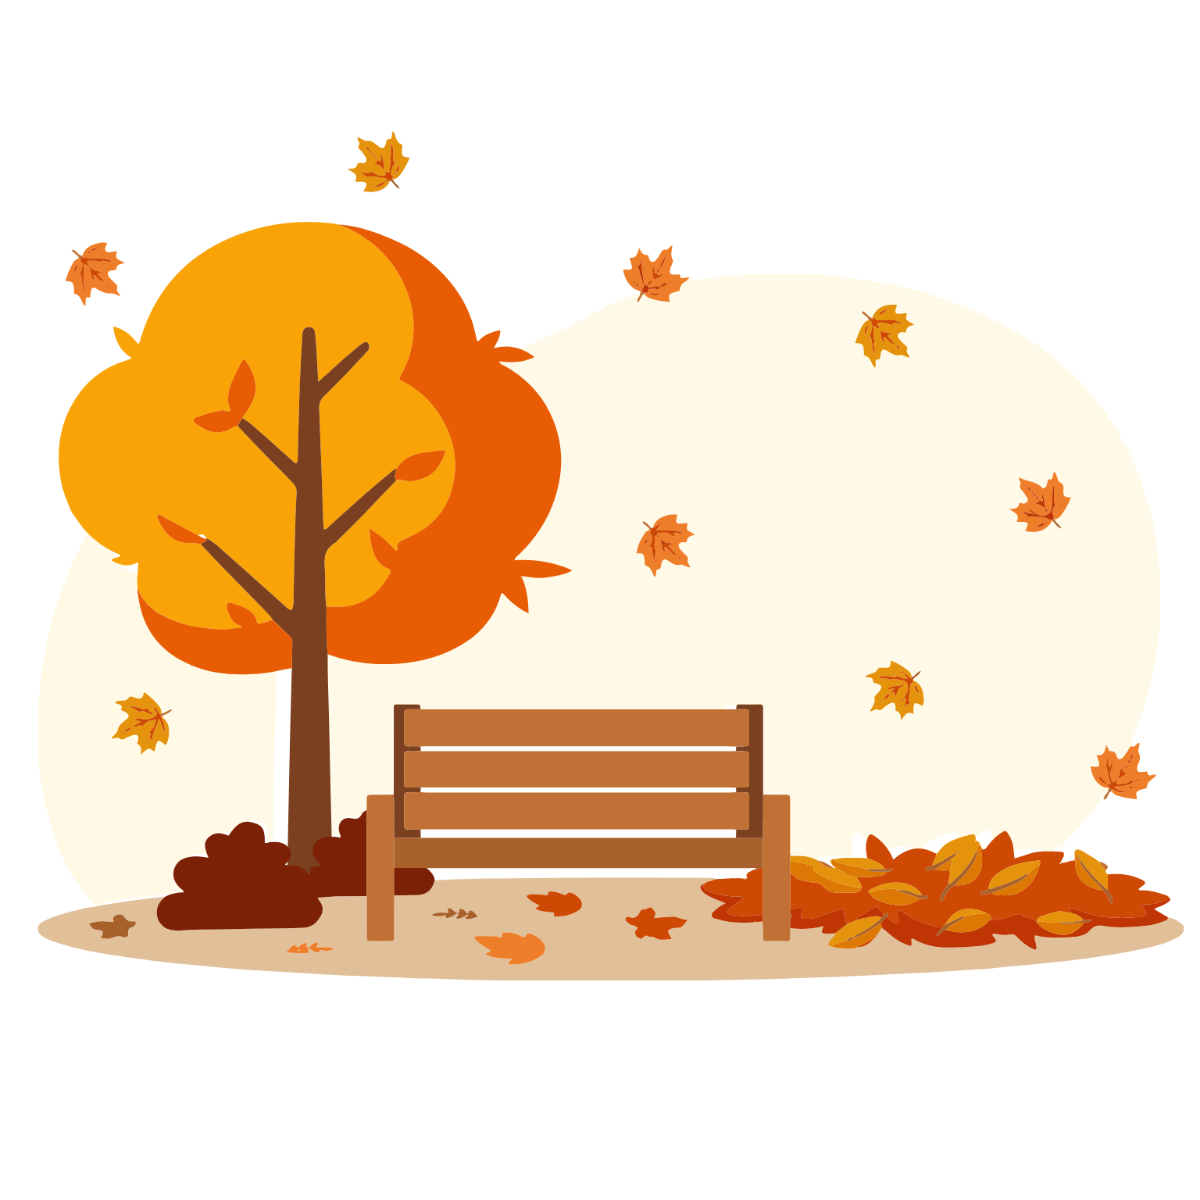 Scattered Leaves Autumn Vector Template